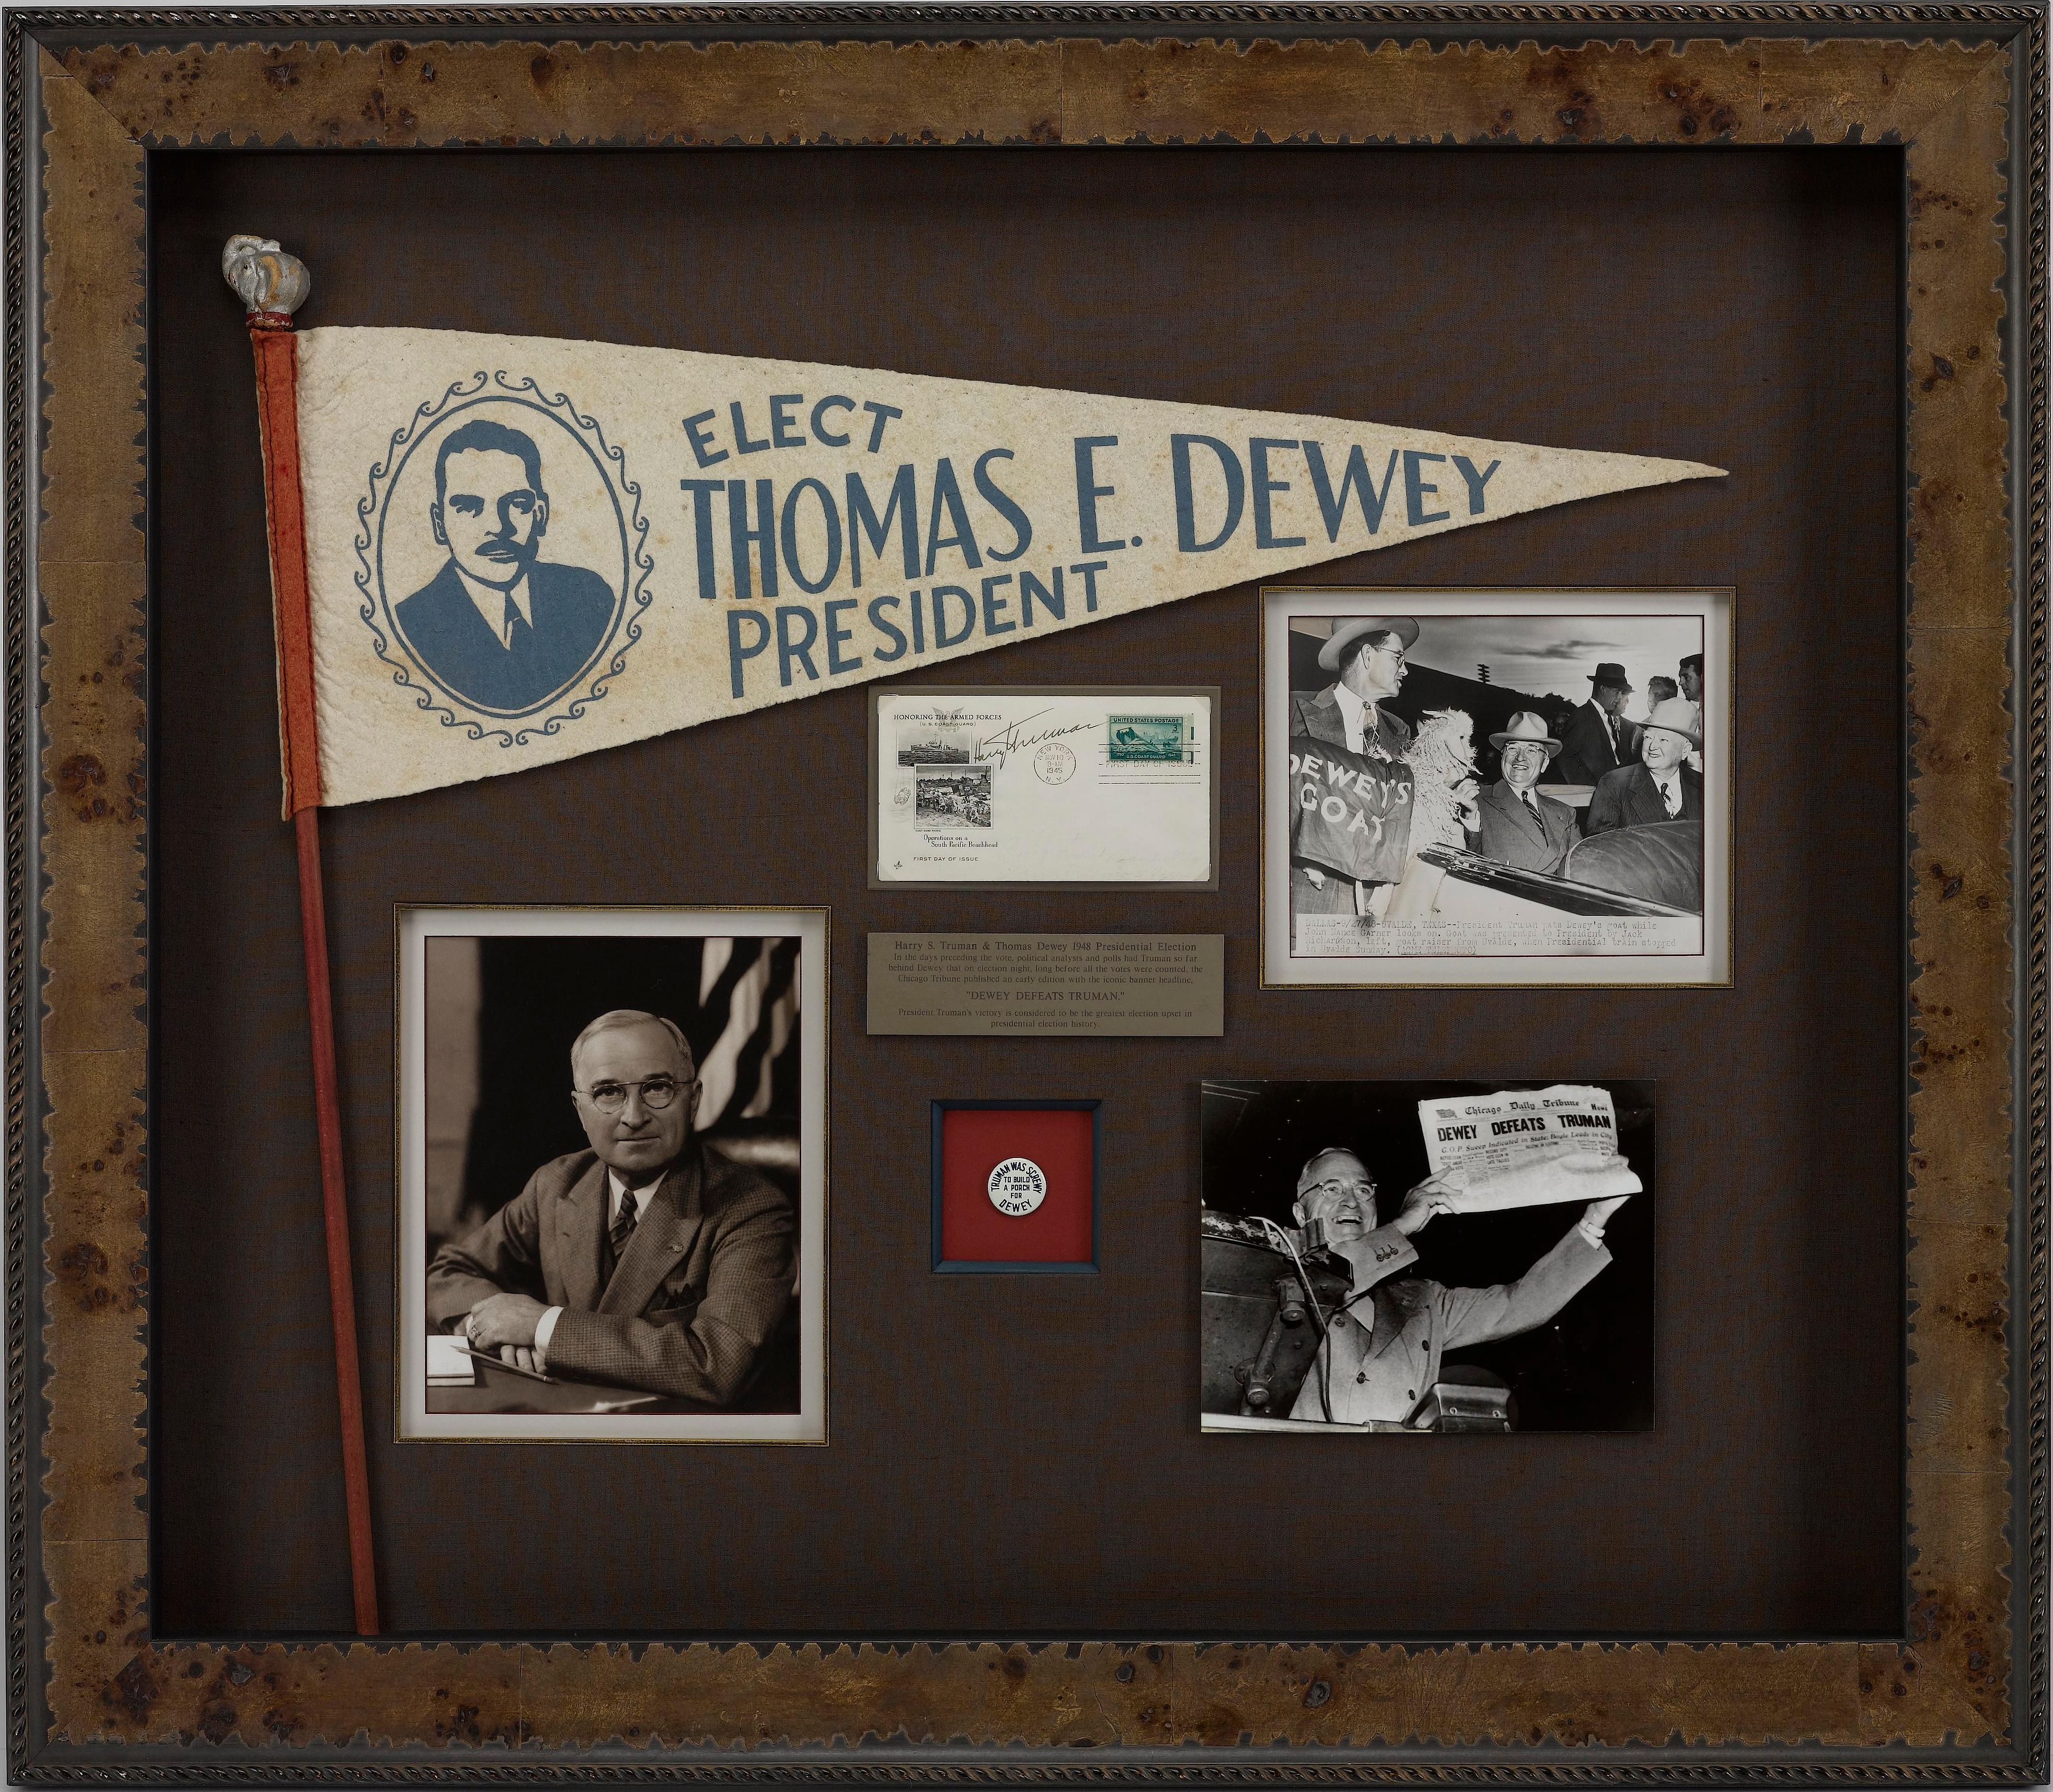 Presented is a unique commemorative collage, celebrating the 1948 U.S. presidential election between Harry Truman and Thomas Dewey. This one-of-a-kind collage features a Harry Truman signed commemorative postal cover, a Dewey campaign pennant, a